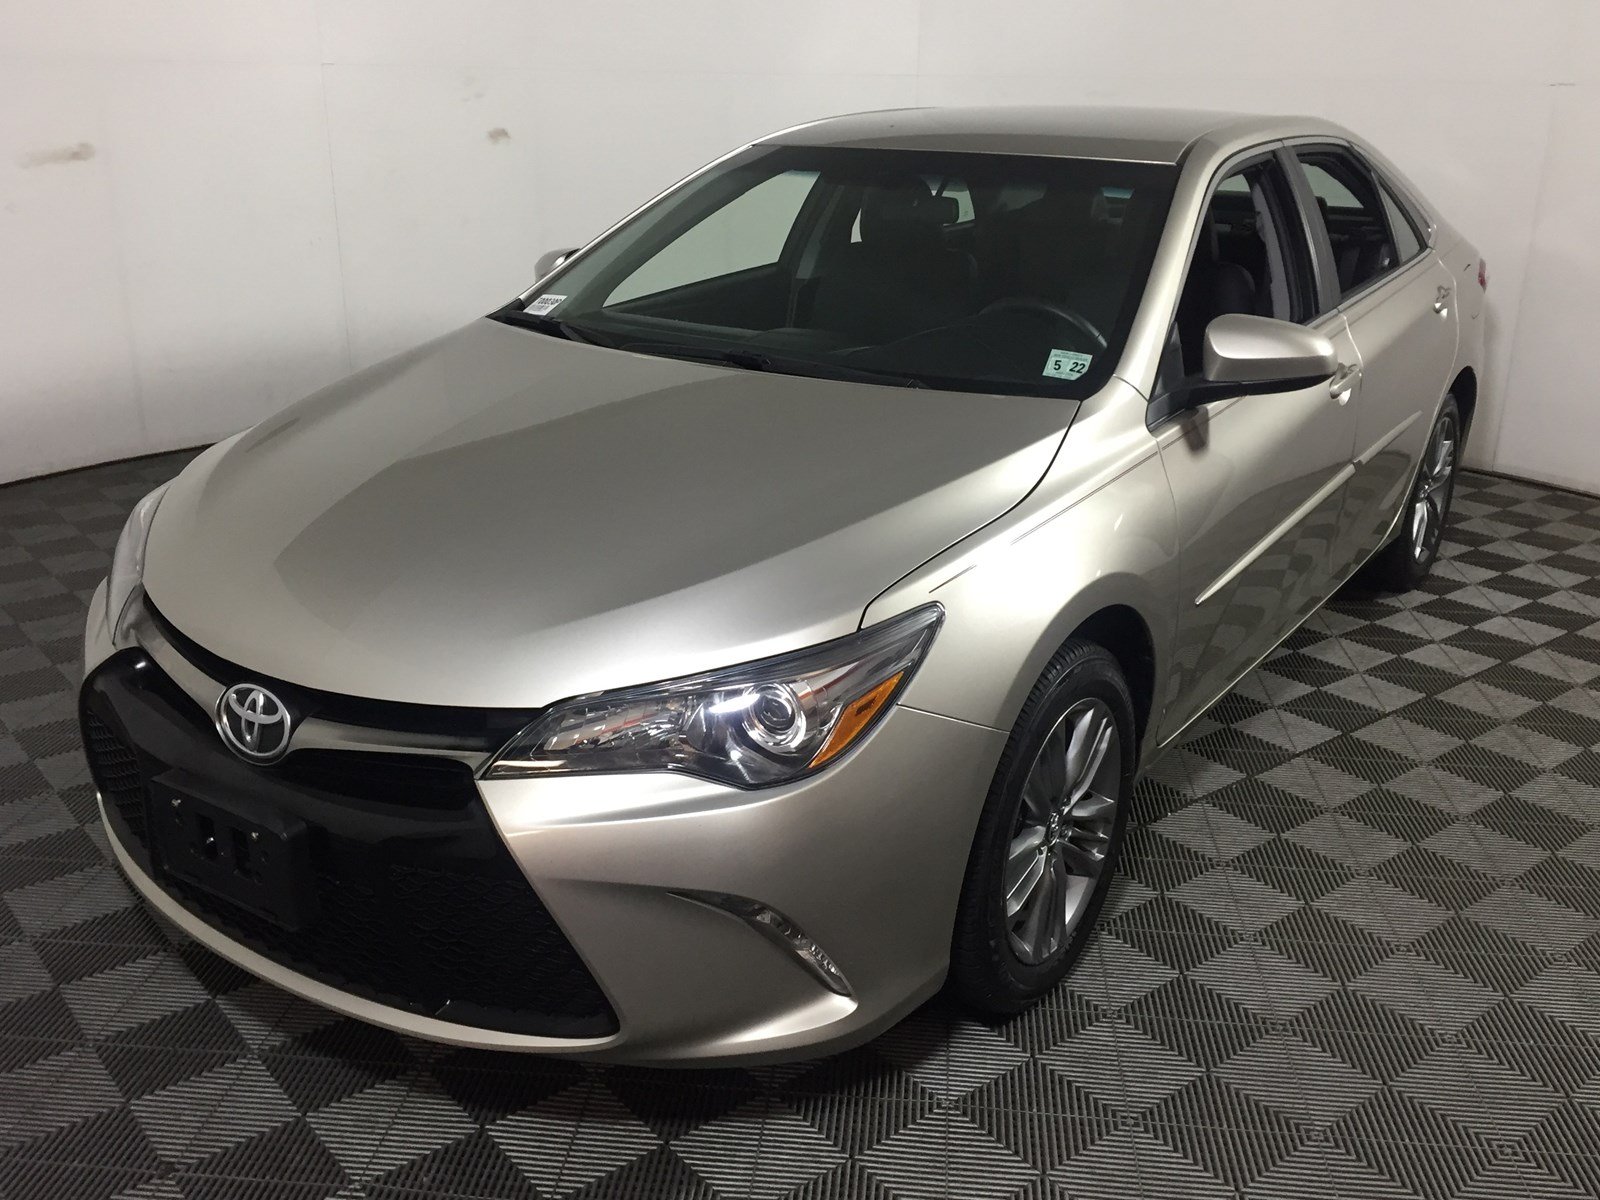 Certified Pre-Owned 2017 Toyota Camry SE FWD 4dr Car